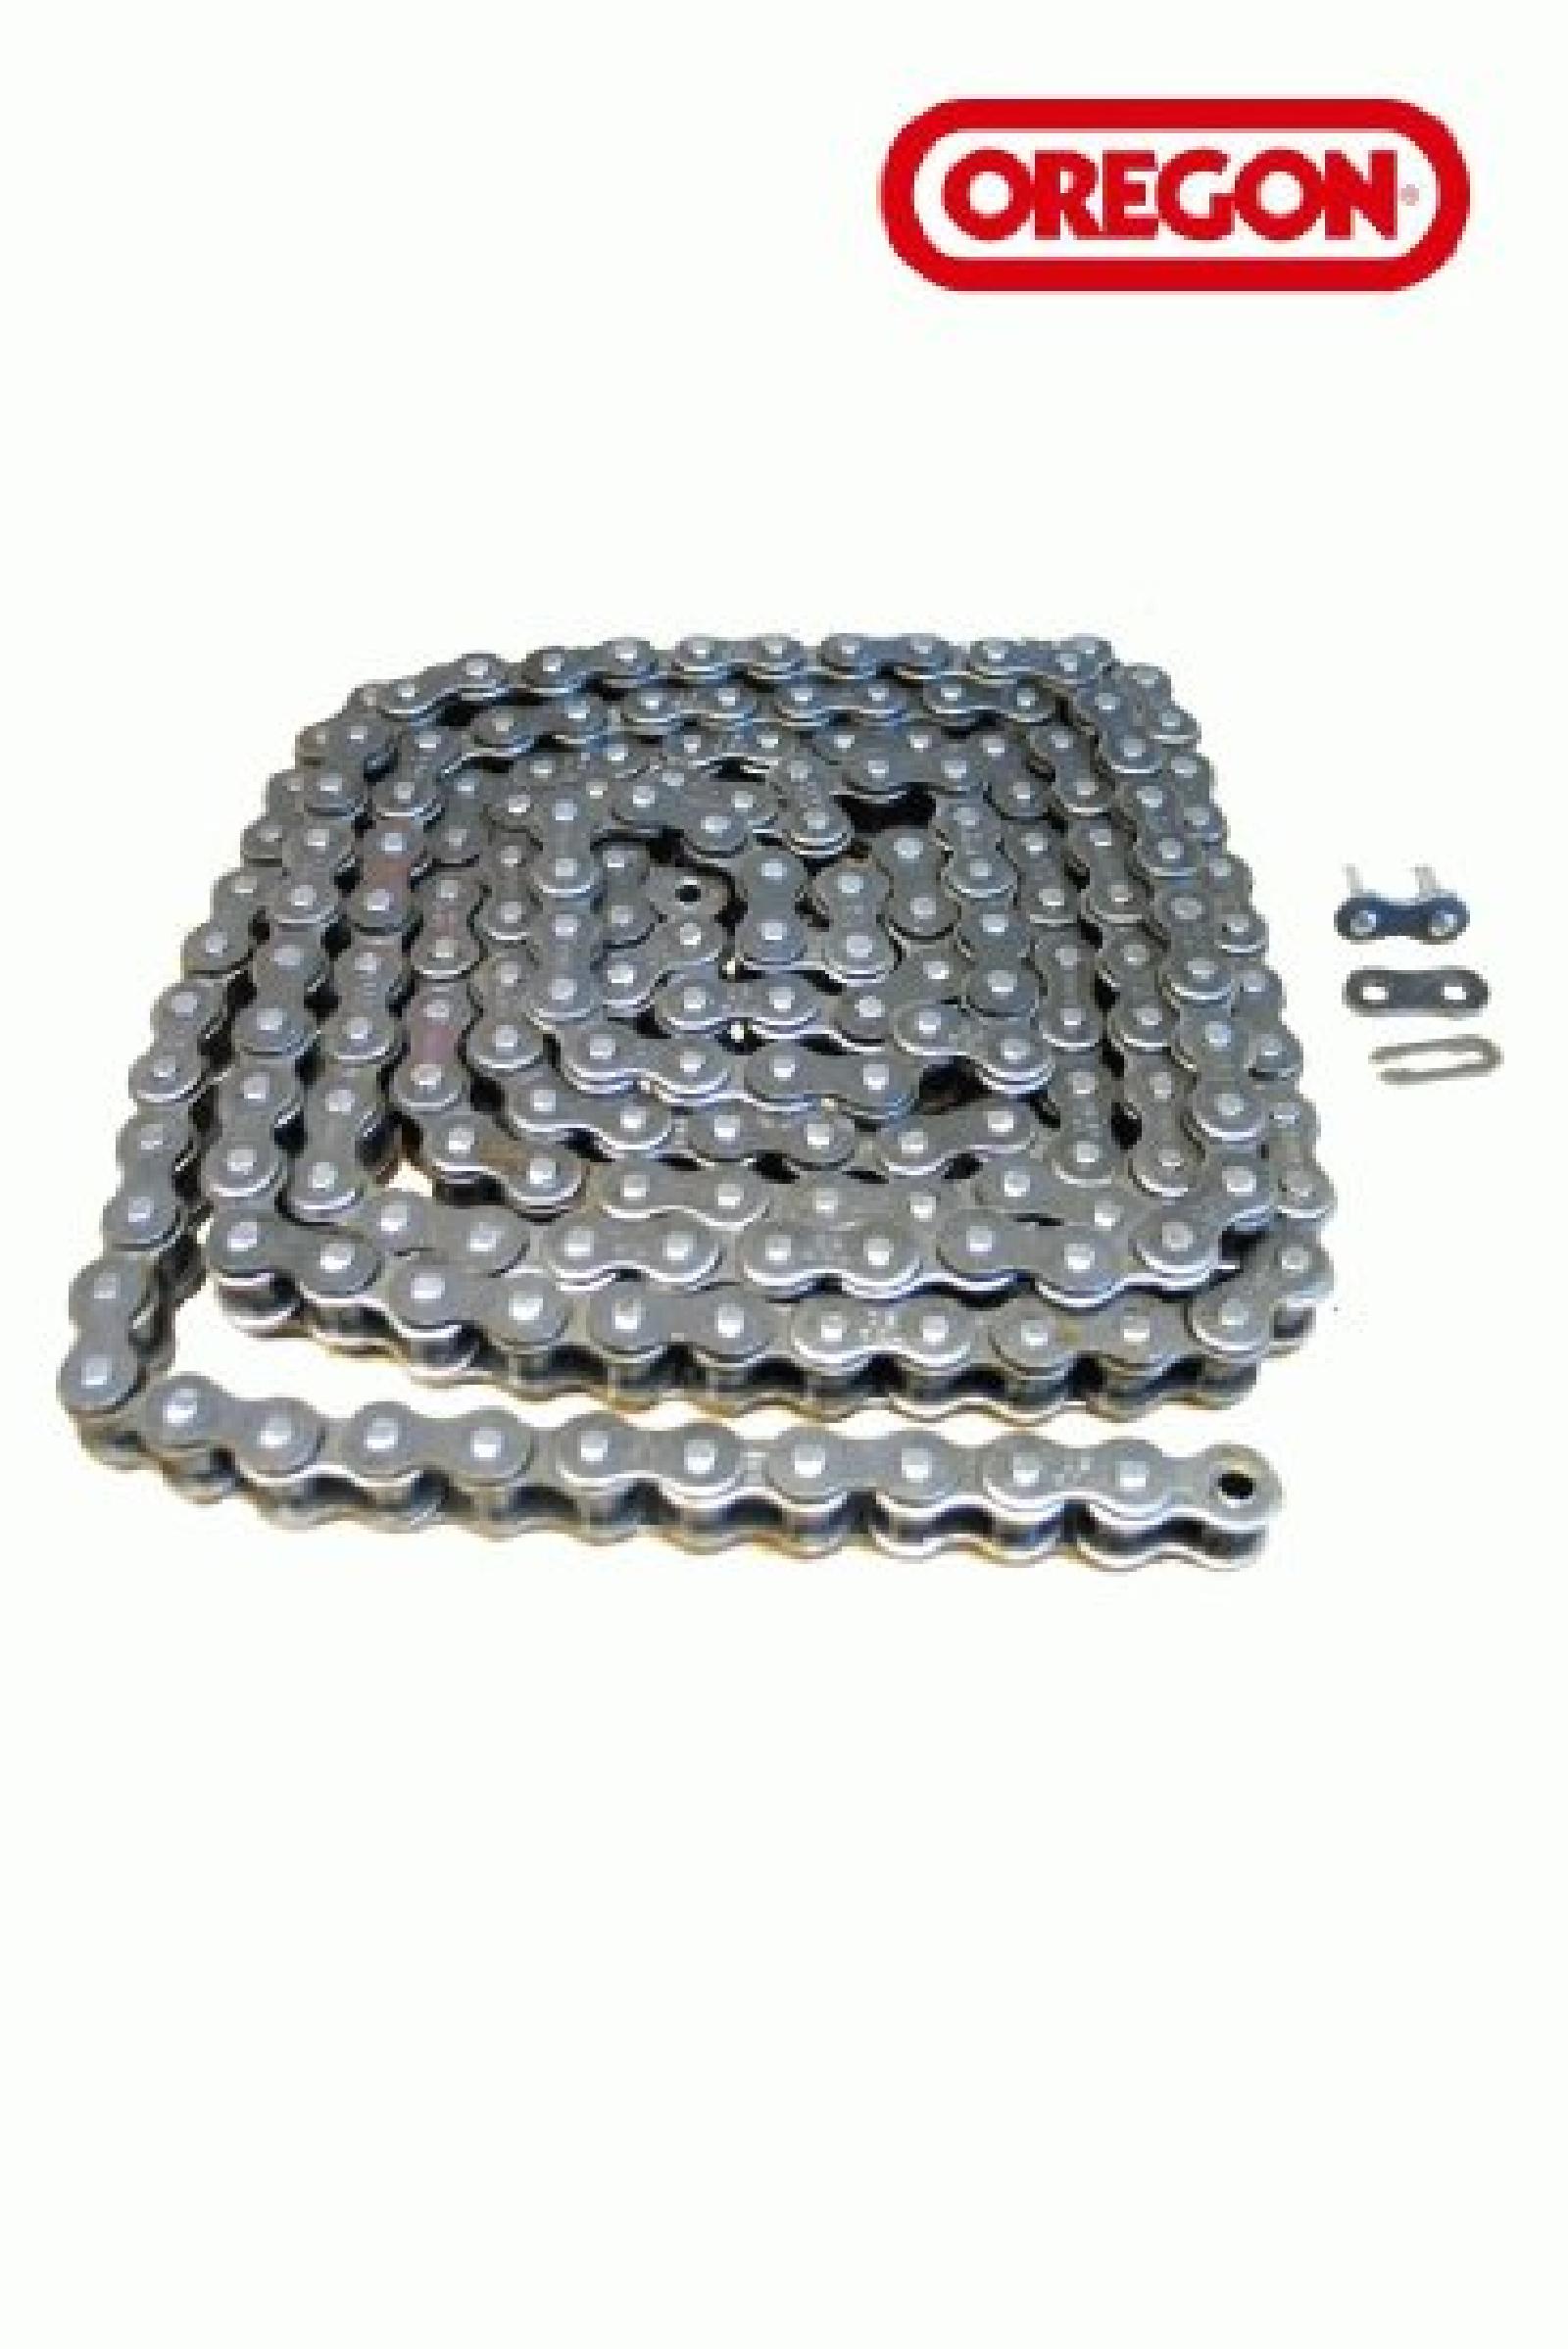 ROLLER CHAIN NO. 50 10FT part# 32-114 by Oregon - Click Image to Close